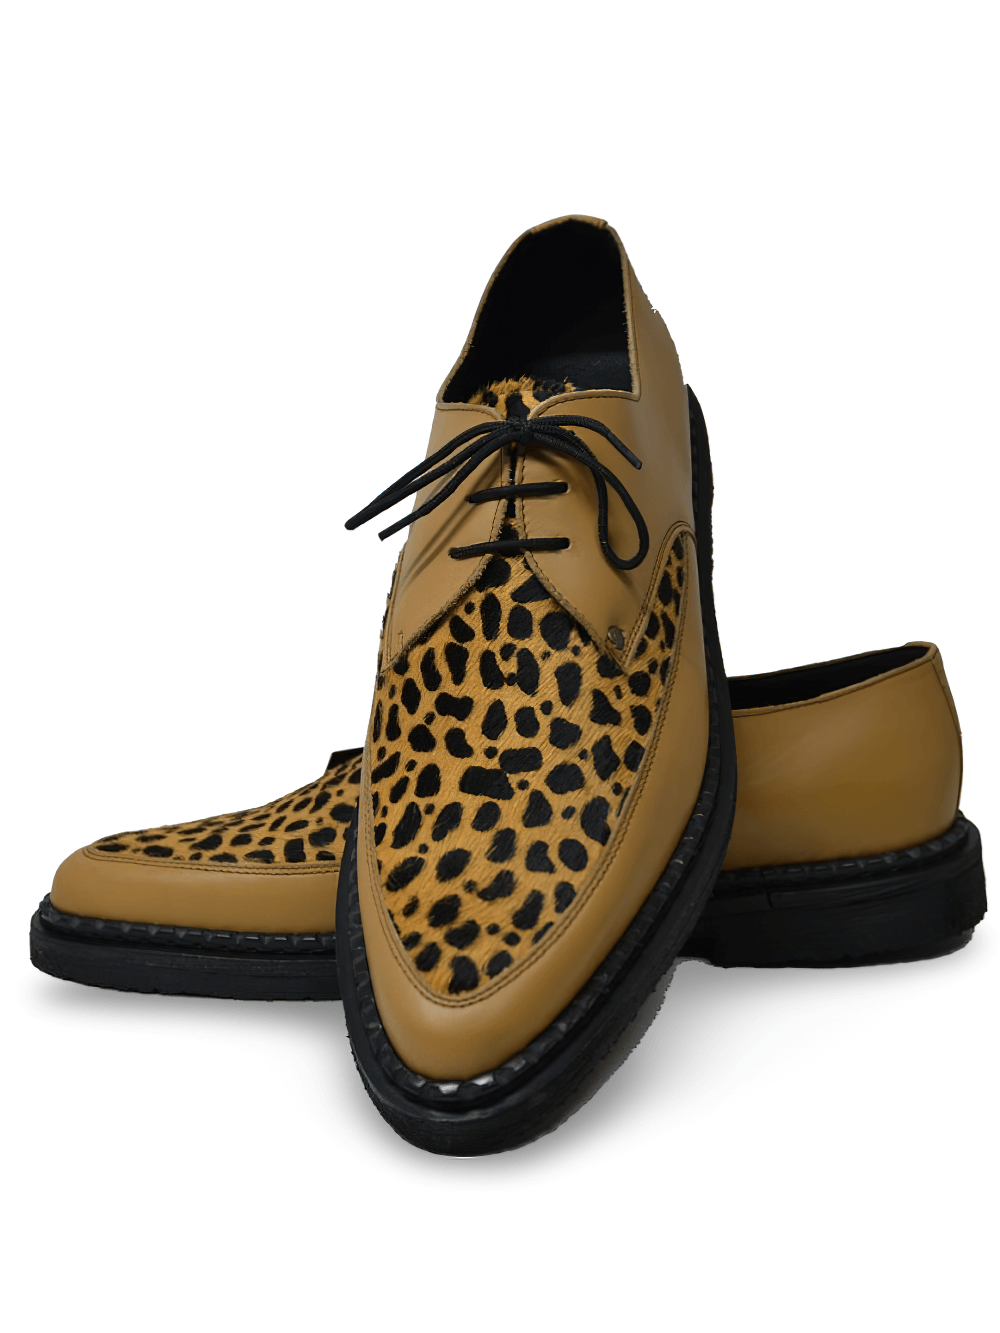 Brown Pointed Creeper Shoes with Bovine Fur and Lace-Up